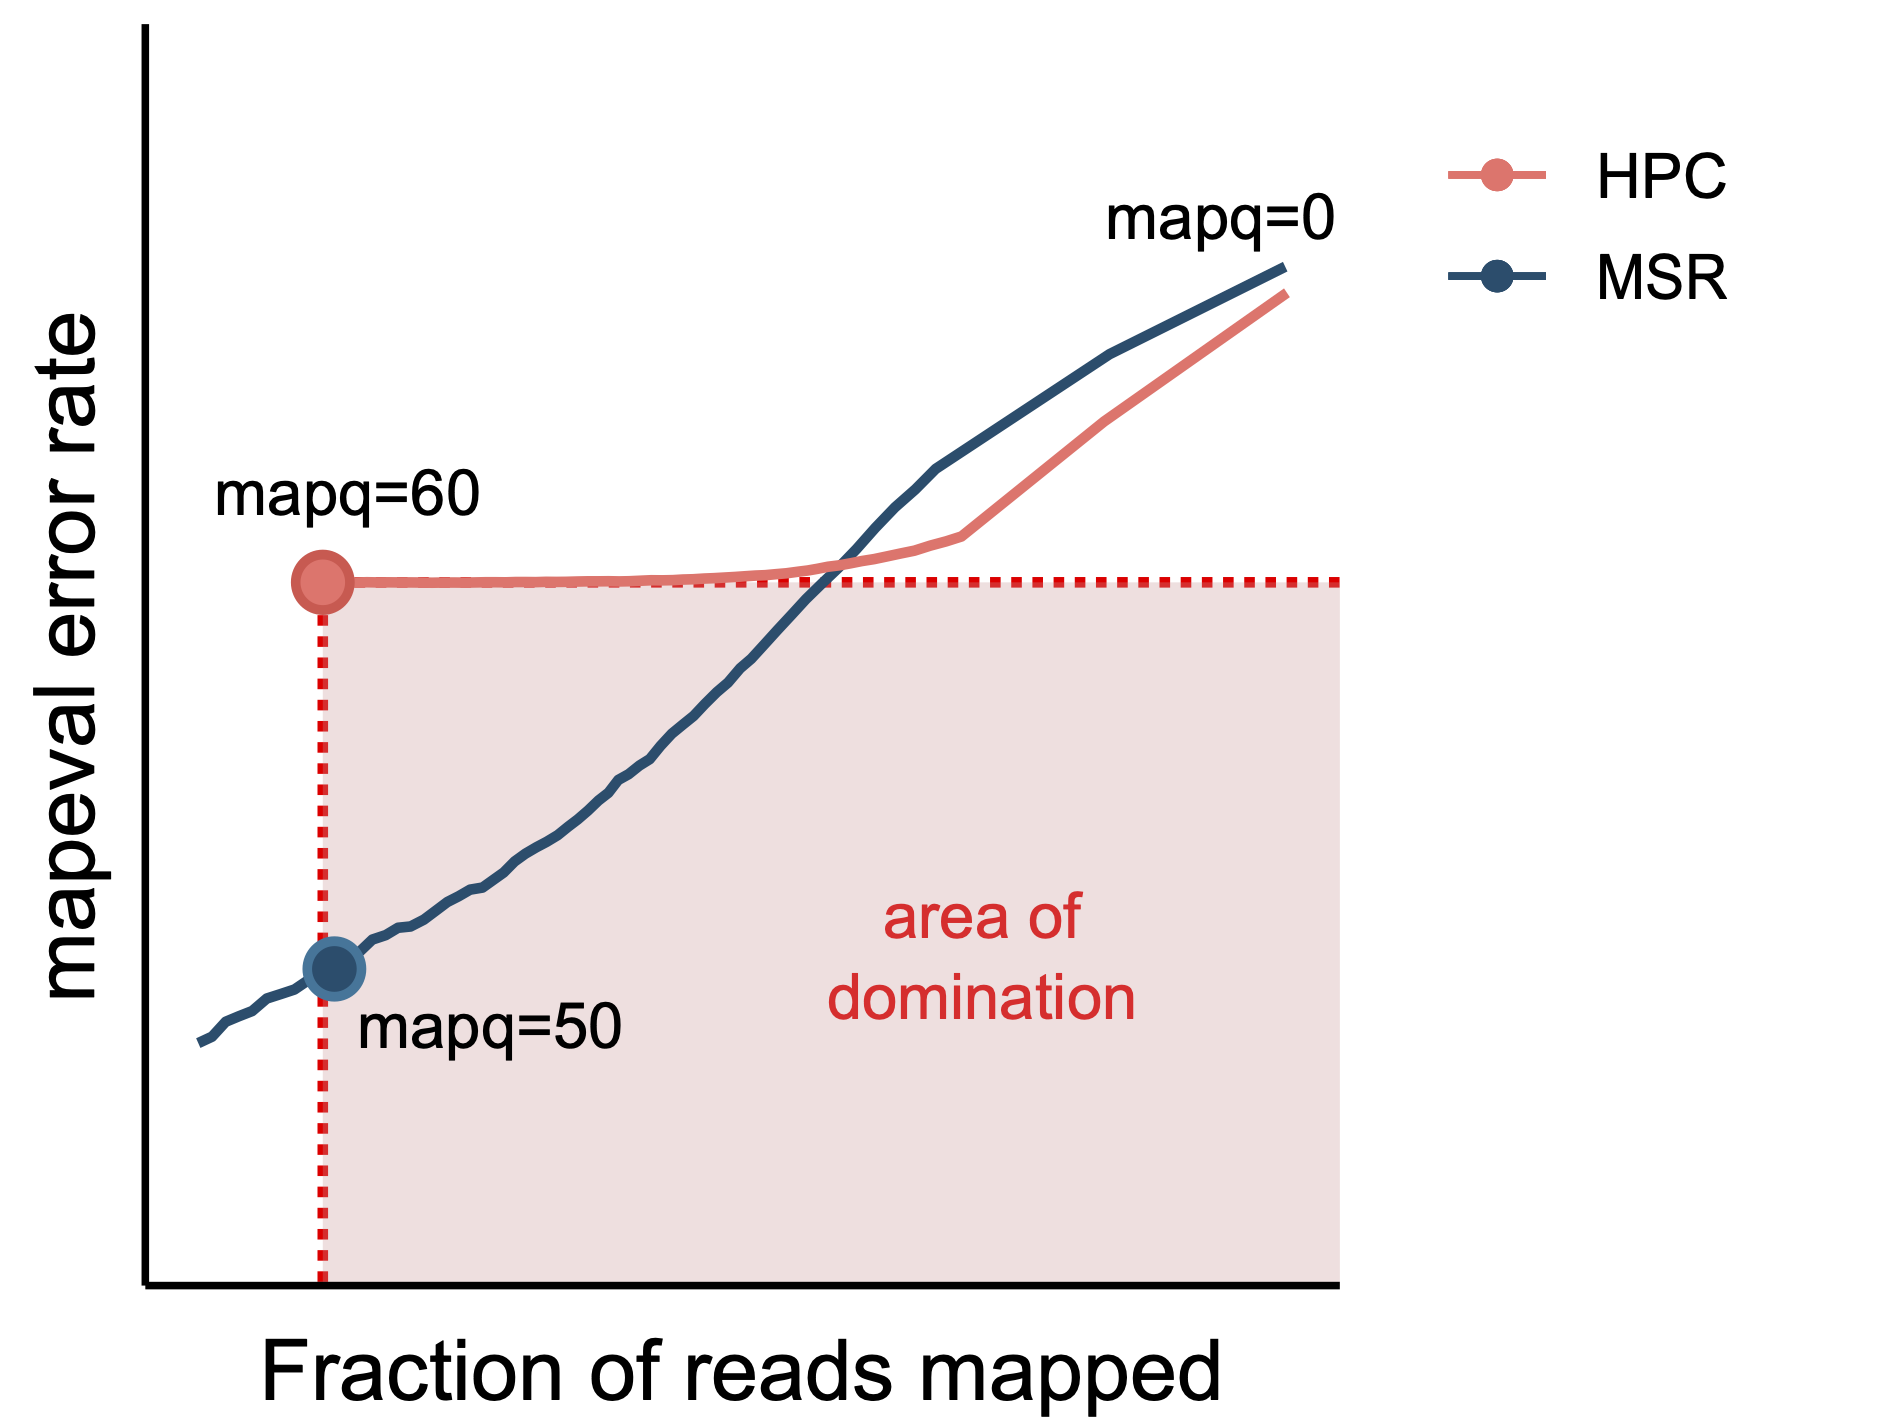 **Illustration of how a respective mapq threshold is chosen for each
of our evaluated MSRs.**  
The orange dot shows the error rate and
fraction of reads mapped for HPC at mapq threshold 60. Anything below
and to the right of this point is strictly better than HPC 60, i.e. it
has both a lower error rate and higher fraction of reads mapped. If an
evaluated MSR does not pass through this region, then it is discarded
from further consideration. In the figure, the blue MSR does pass
through this region, indicating that it is better than HPC 60. We
identify the leftmost point (marked as a blue dot) and use the mapq
threshold at that point as the respective threshold.